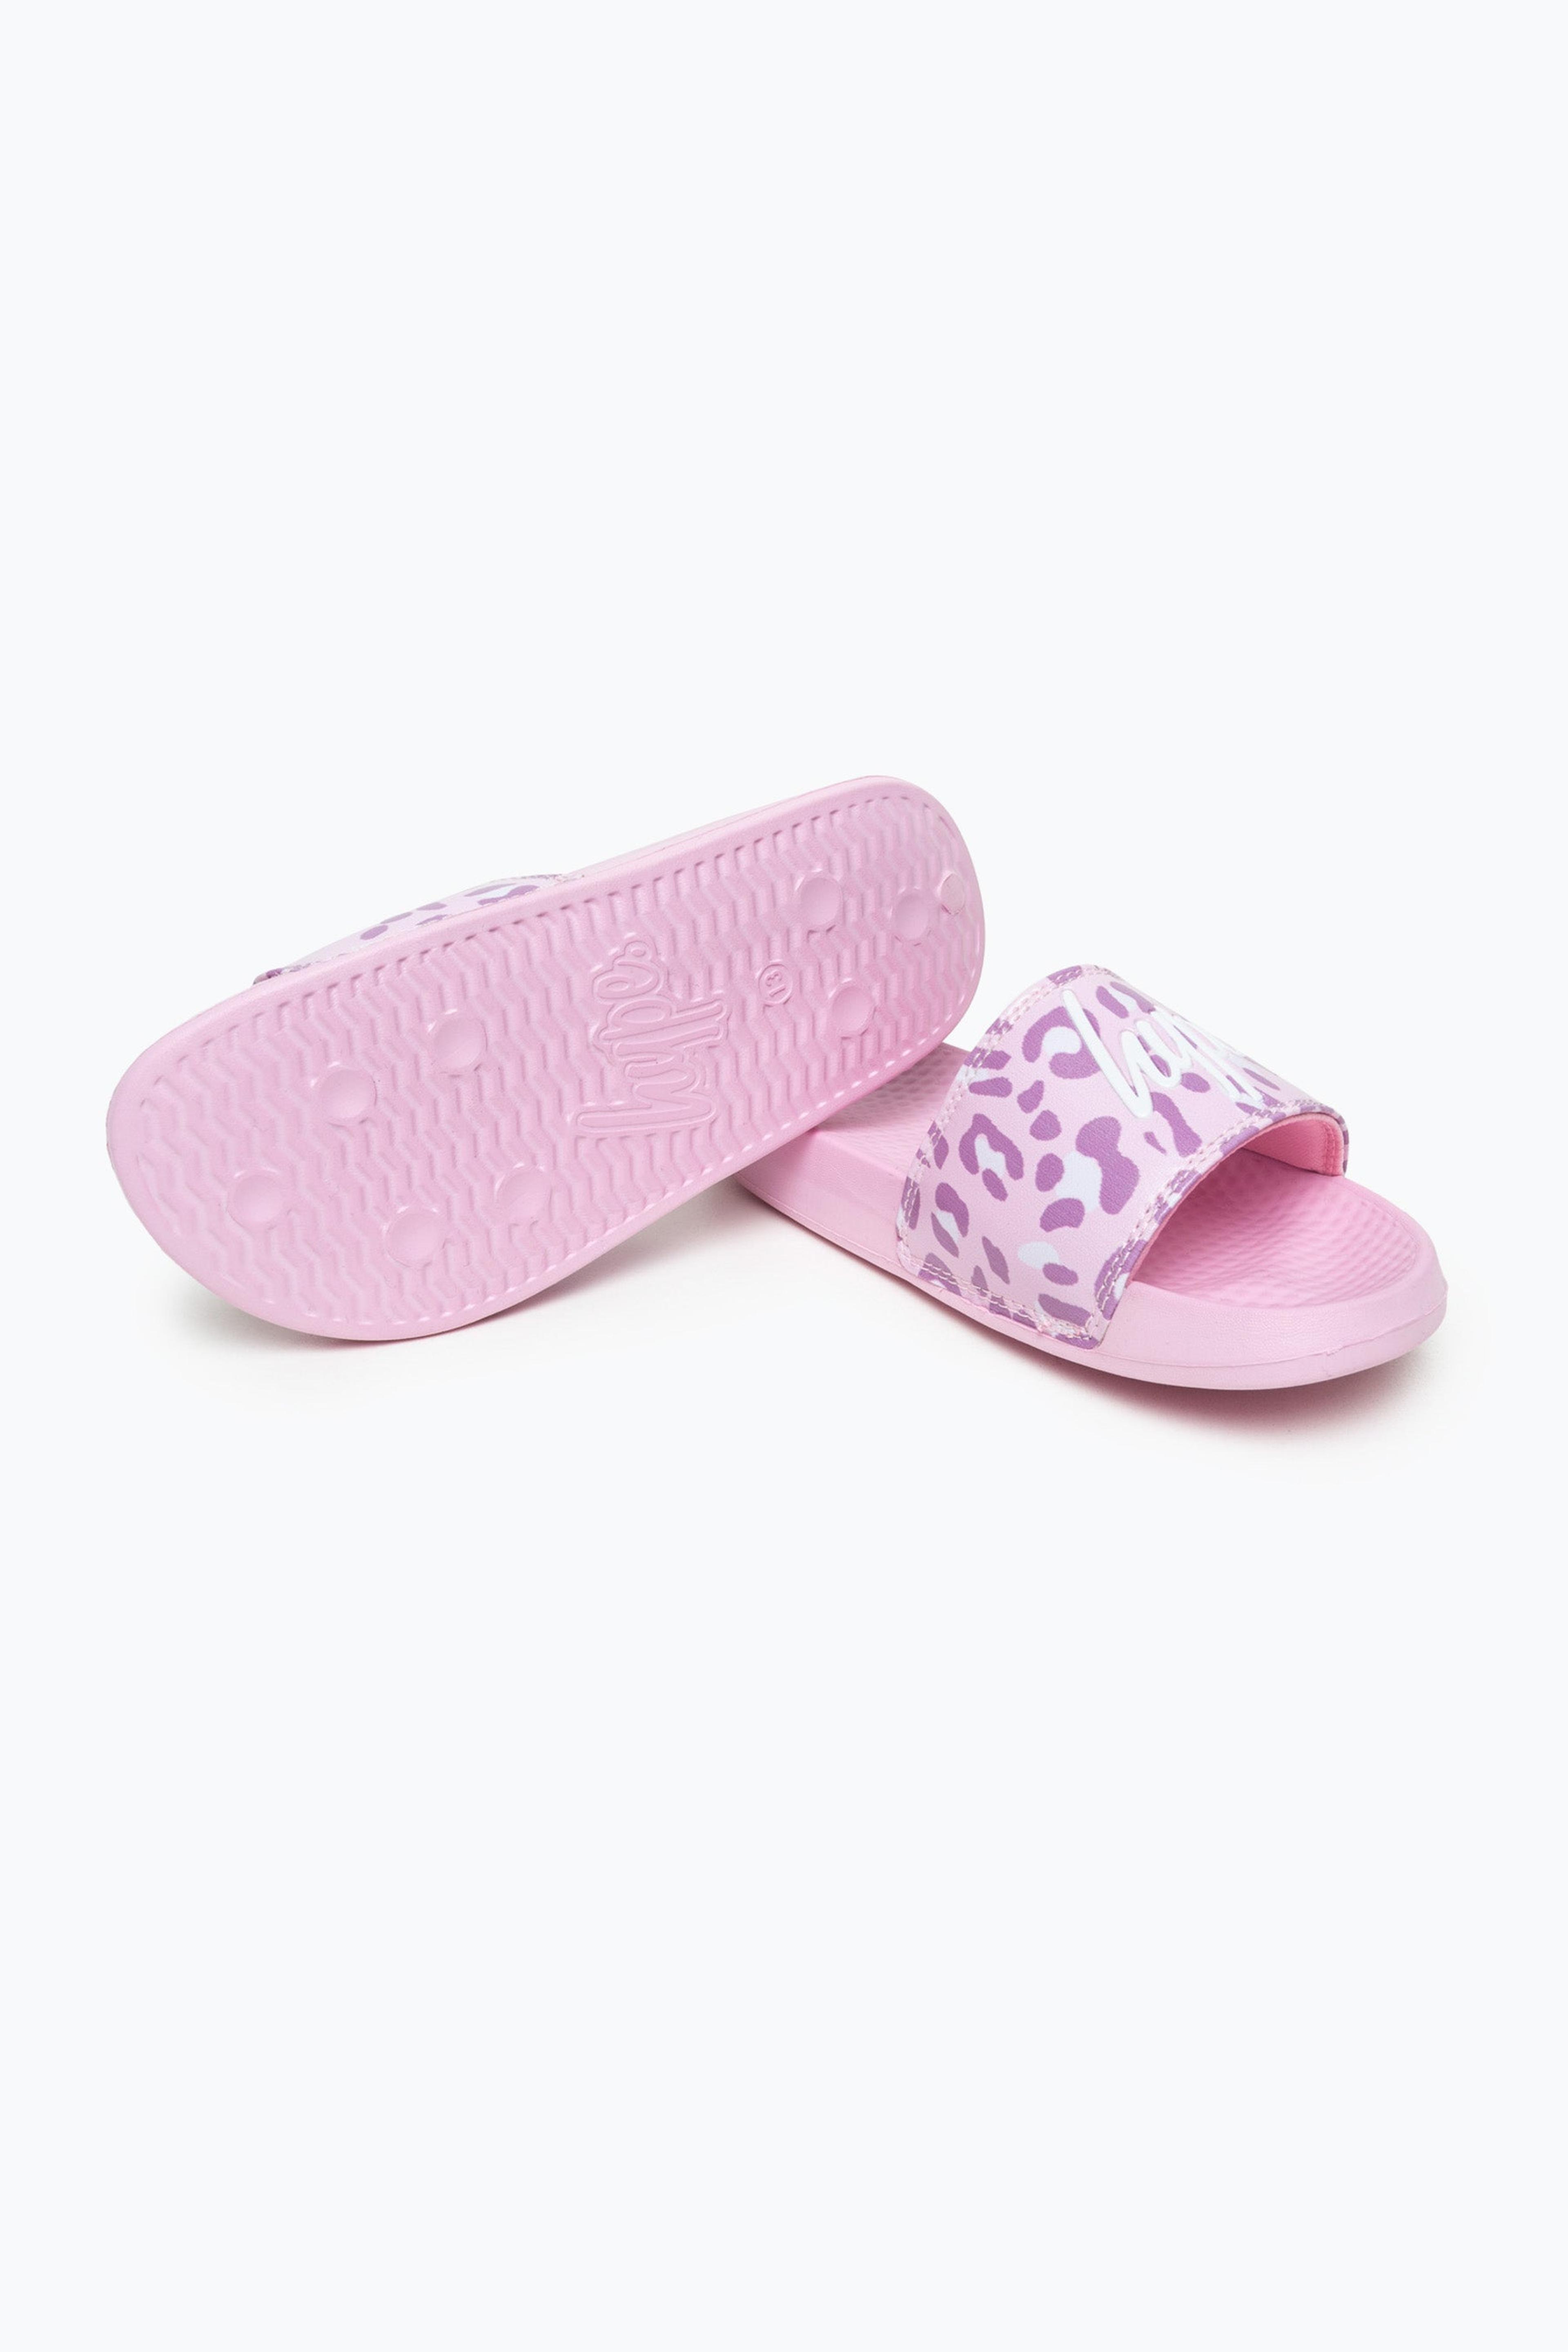 Alternate View 3 of HYPE KIDS UNISEX PINK TONE ON TONE LEOPARD CREST SLIDERS